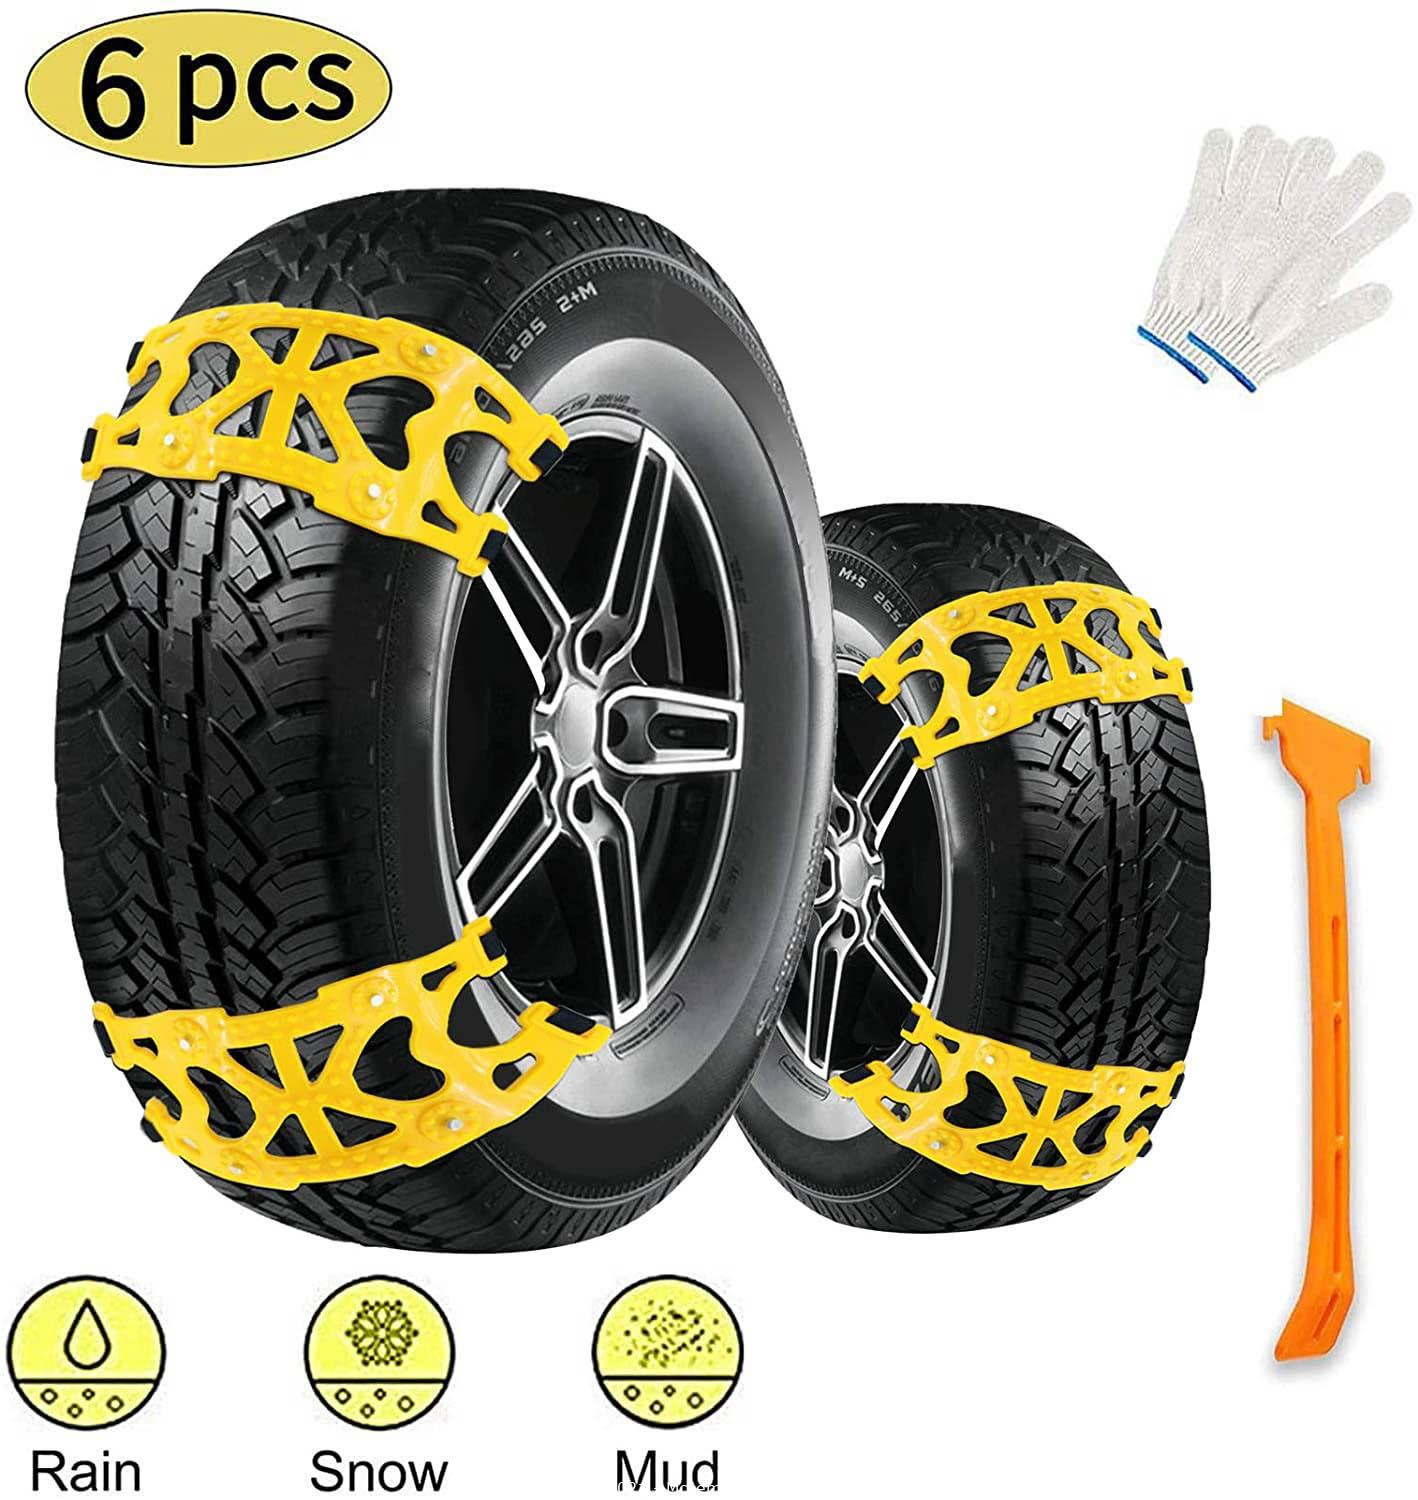 6 Sets Adjustable Anti Slip Emergency Tire Straps Security Blocks for Vehicle Buyplus Snow Tire Chains for Cars Cars/SUV/Truck/ATV Winter Wheel Chains 